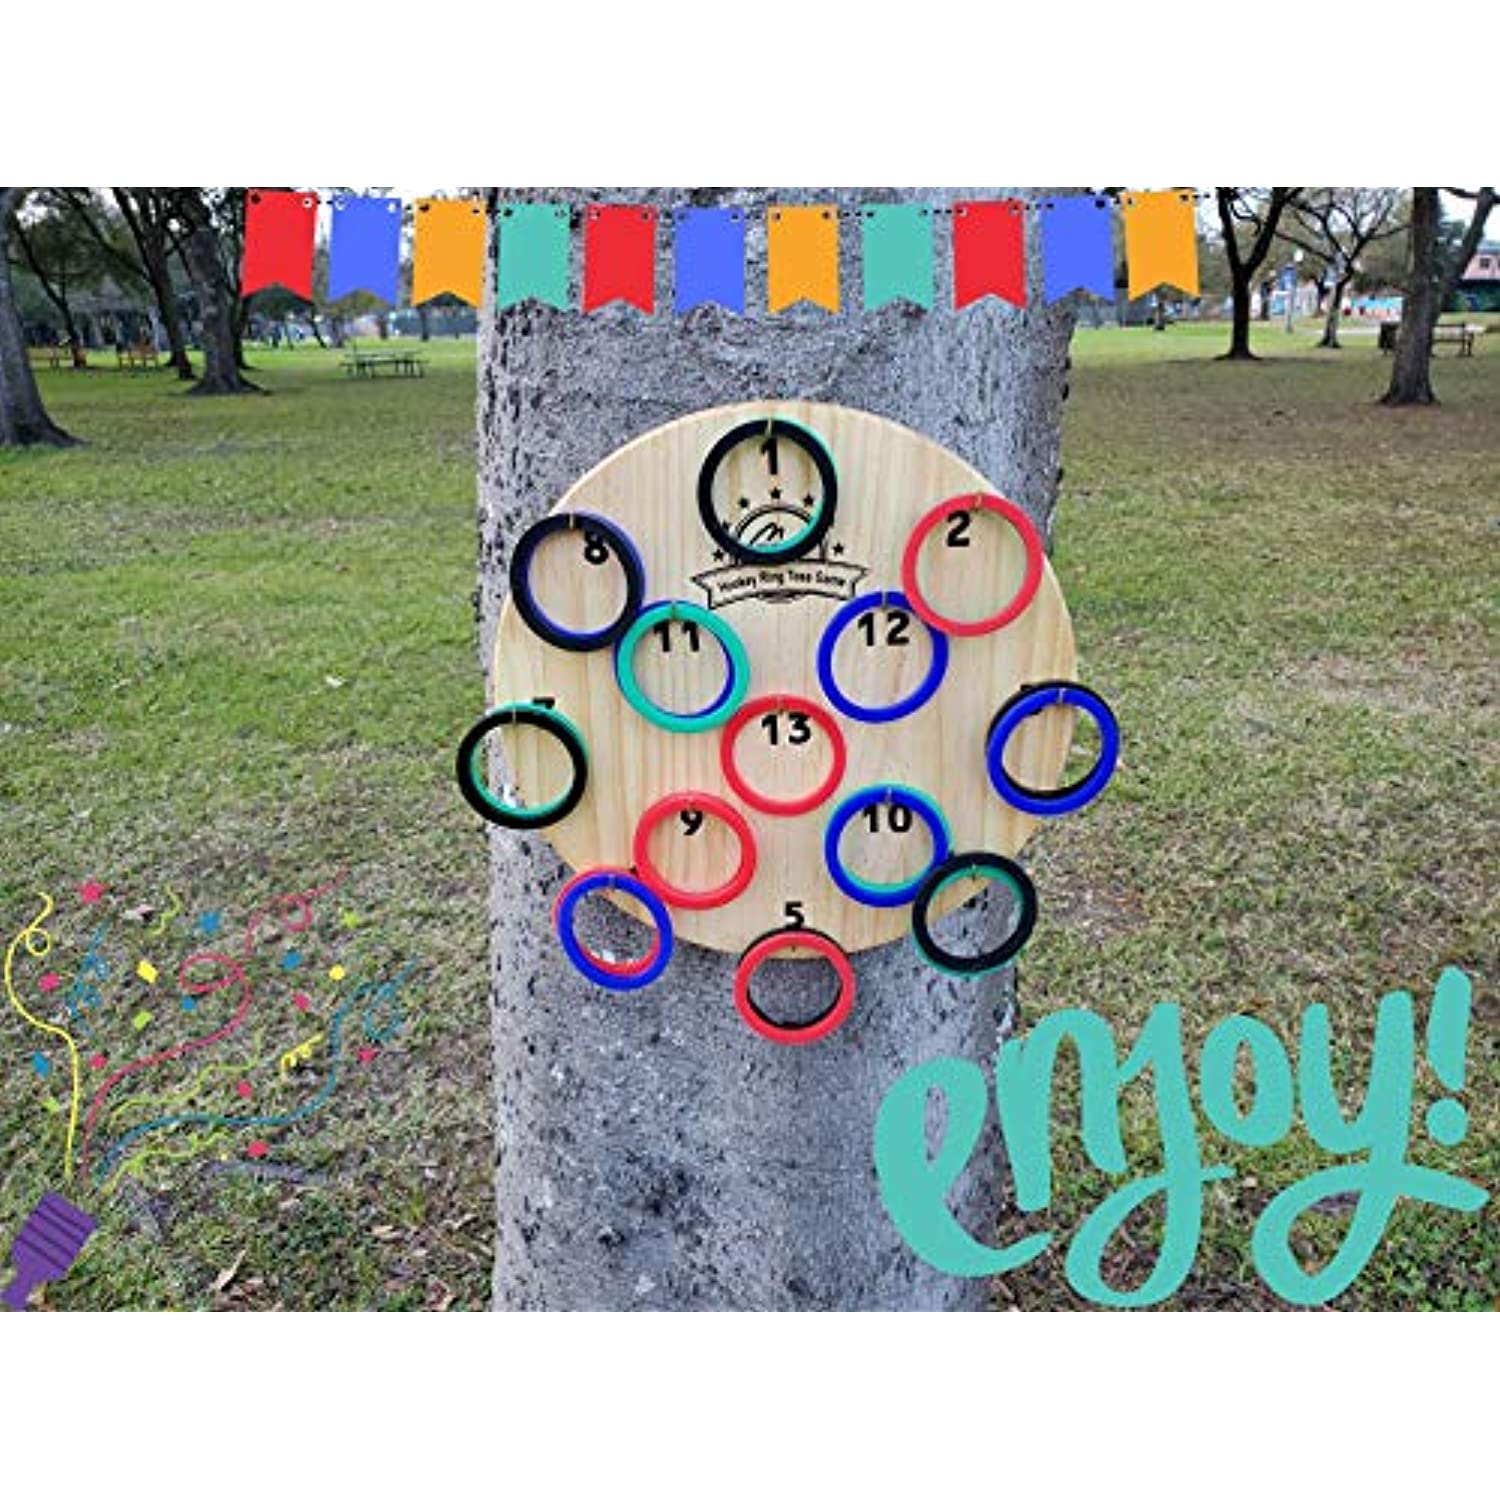 Ring Toss Game with 24 Rings. Beautifully Finished Mens, Dad, Boys, or Girls Gifts. Just Hang on Wall and Play, Fun Outdoor Games. - image 2 of 8